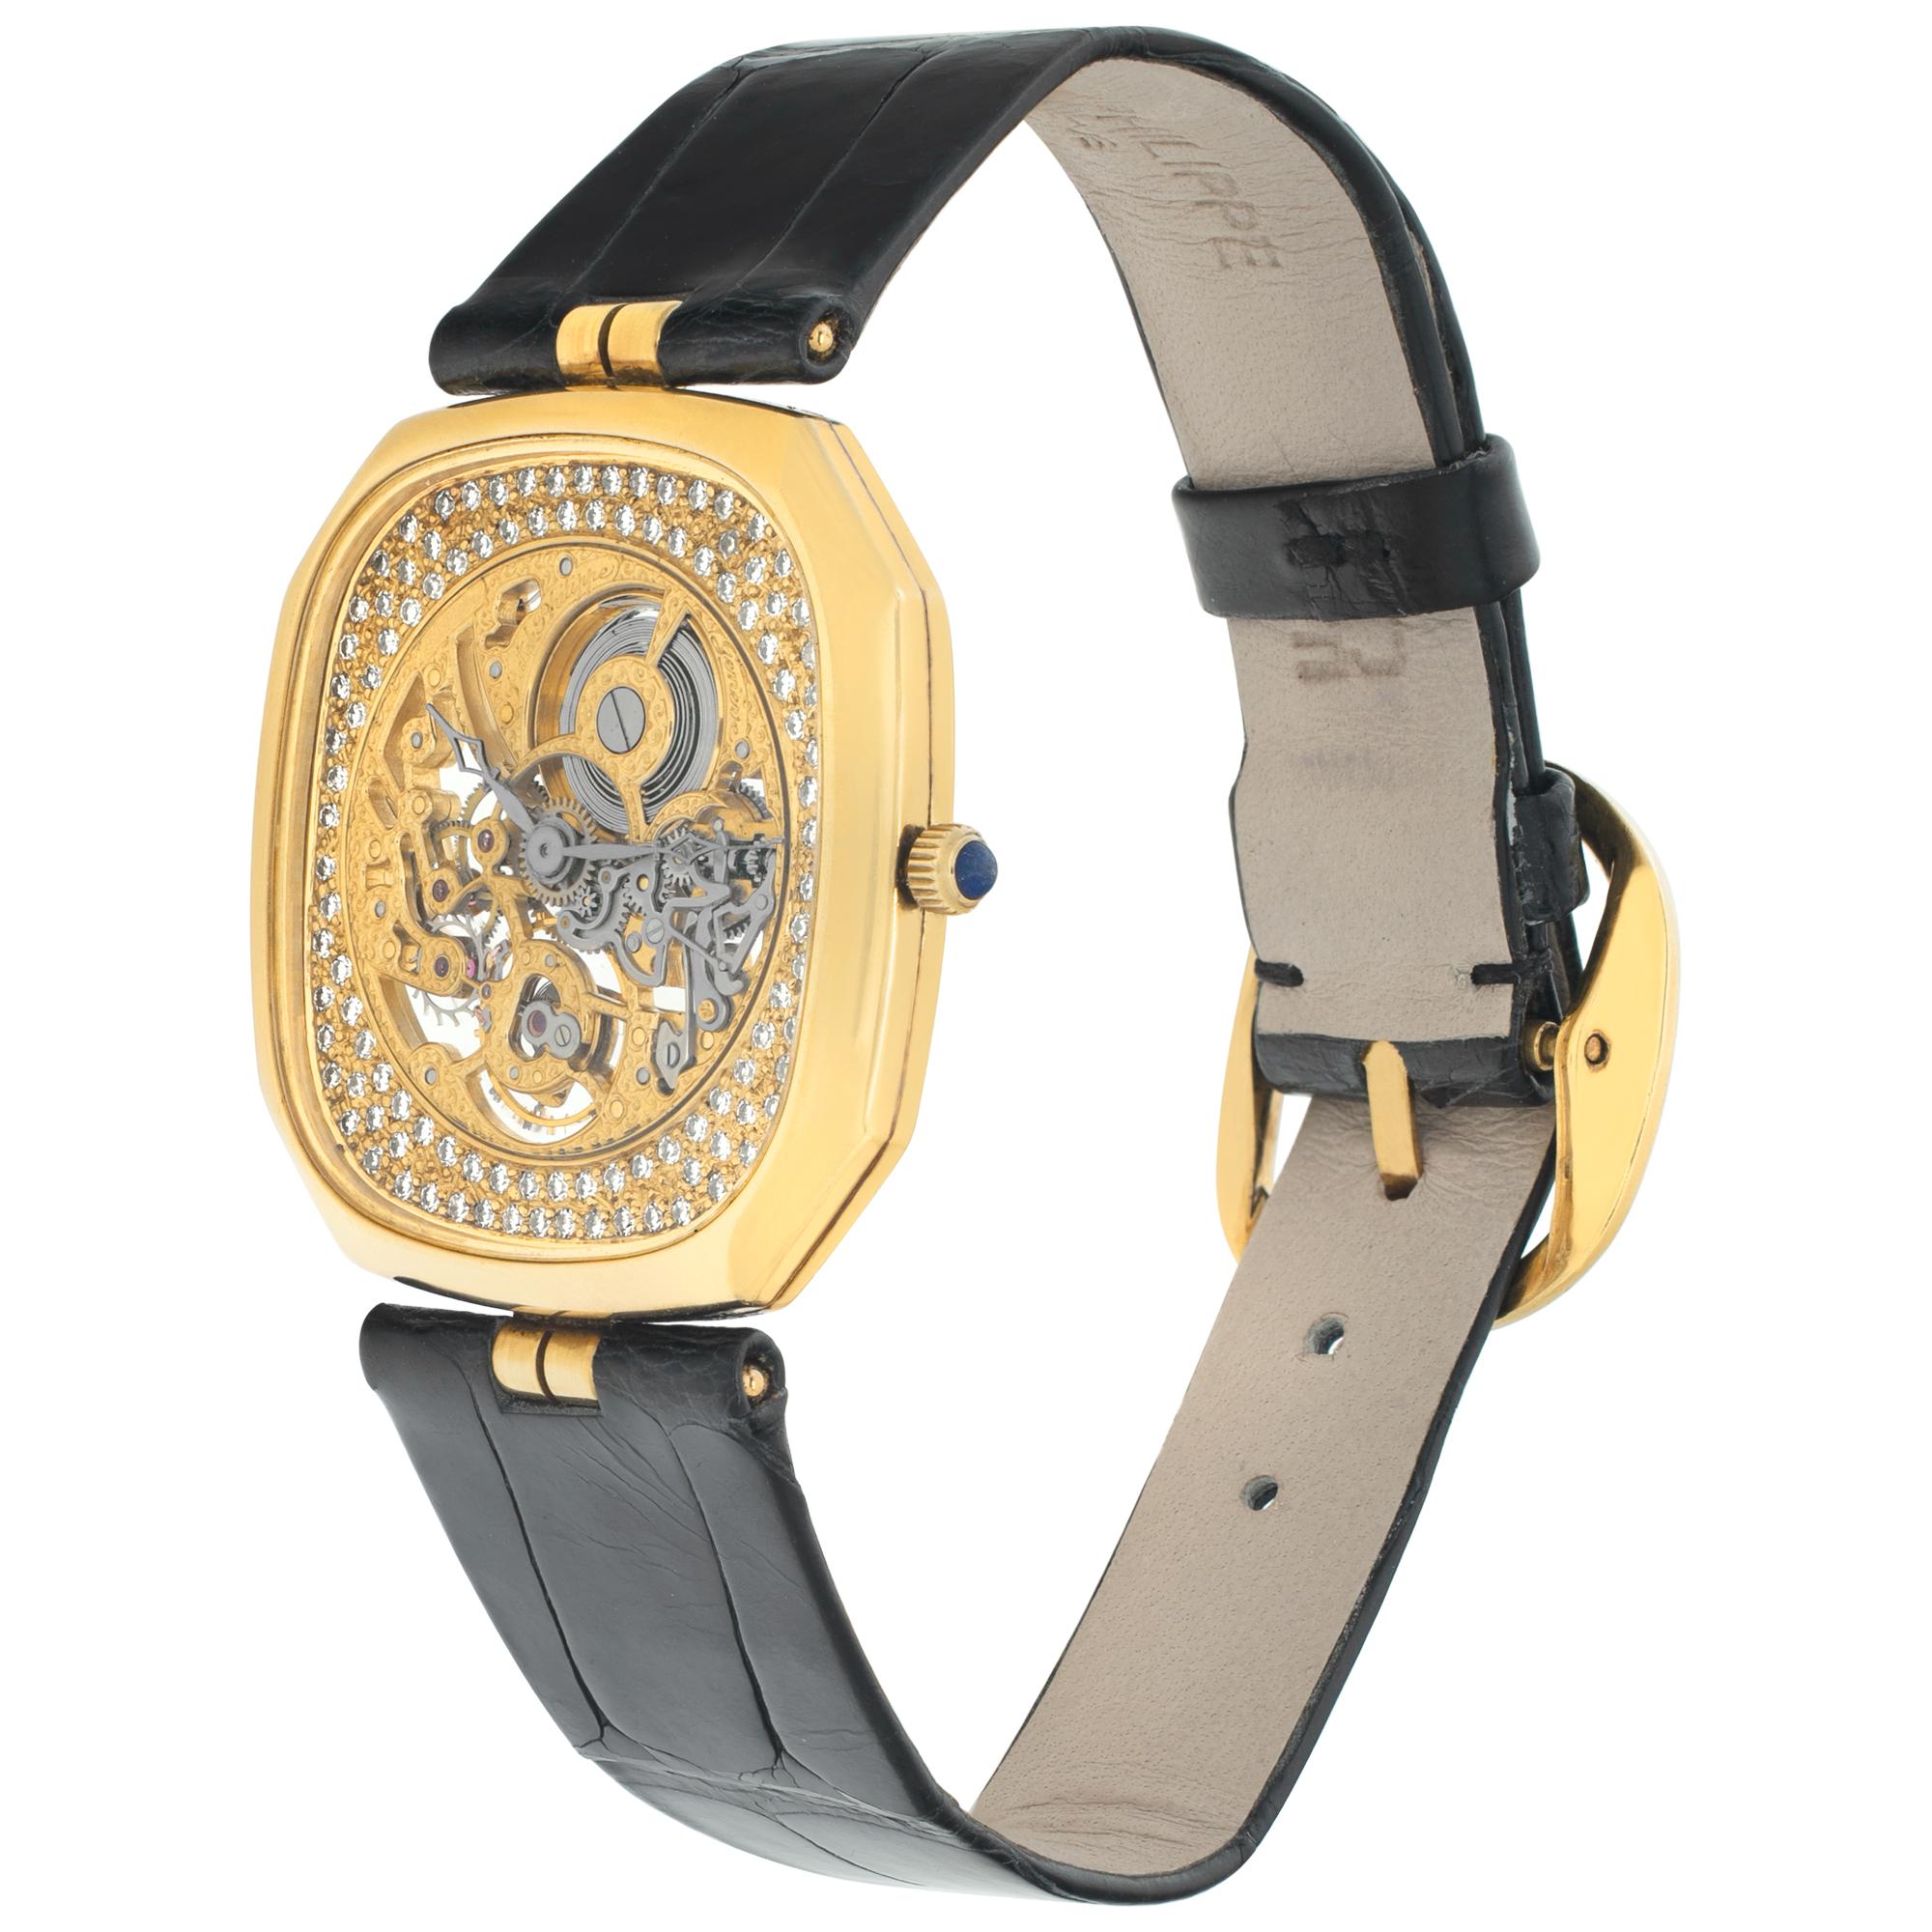 Patek Philippe Squelette skeleton octogonal watch in 18k with pave diamond dial. Manual watch on glossy black alligator strap & original 18k yellow gold Patek Philippe tang buckle. 30 mm case size. Ref 3887. Arcchive papers. Fine Pre-owned Patek